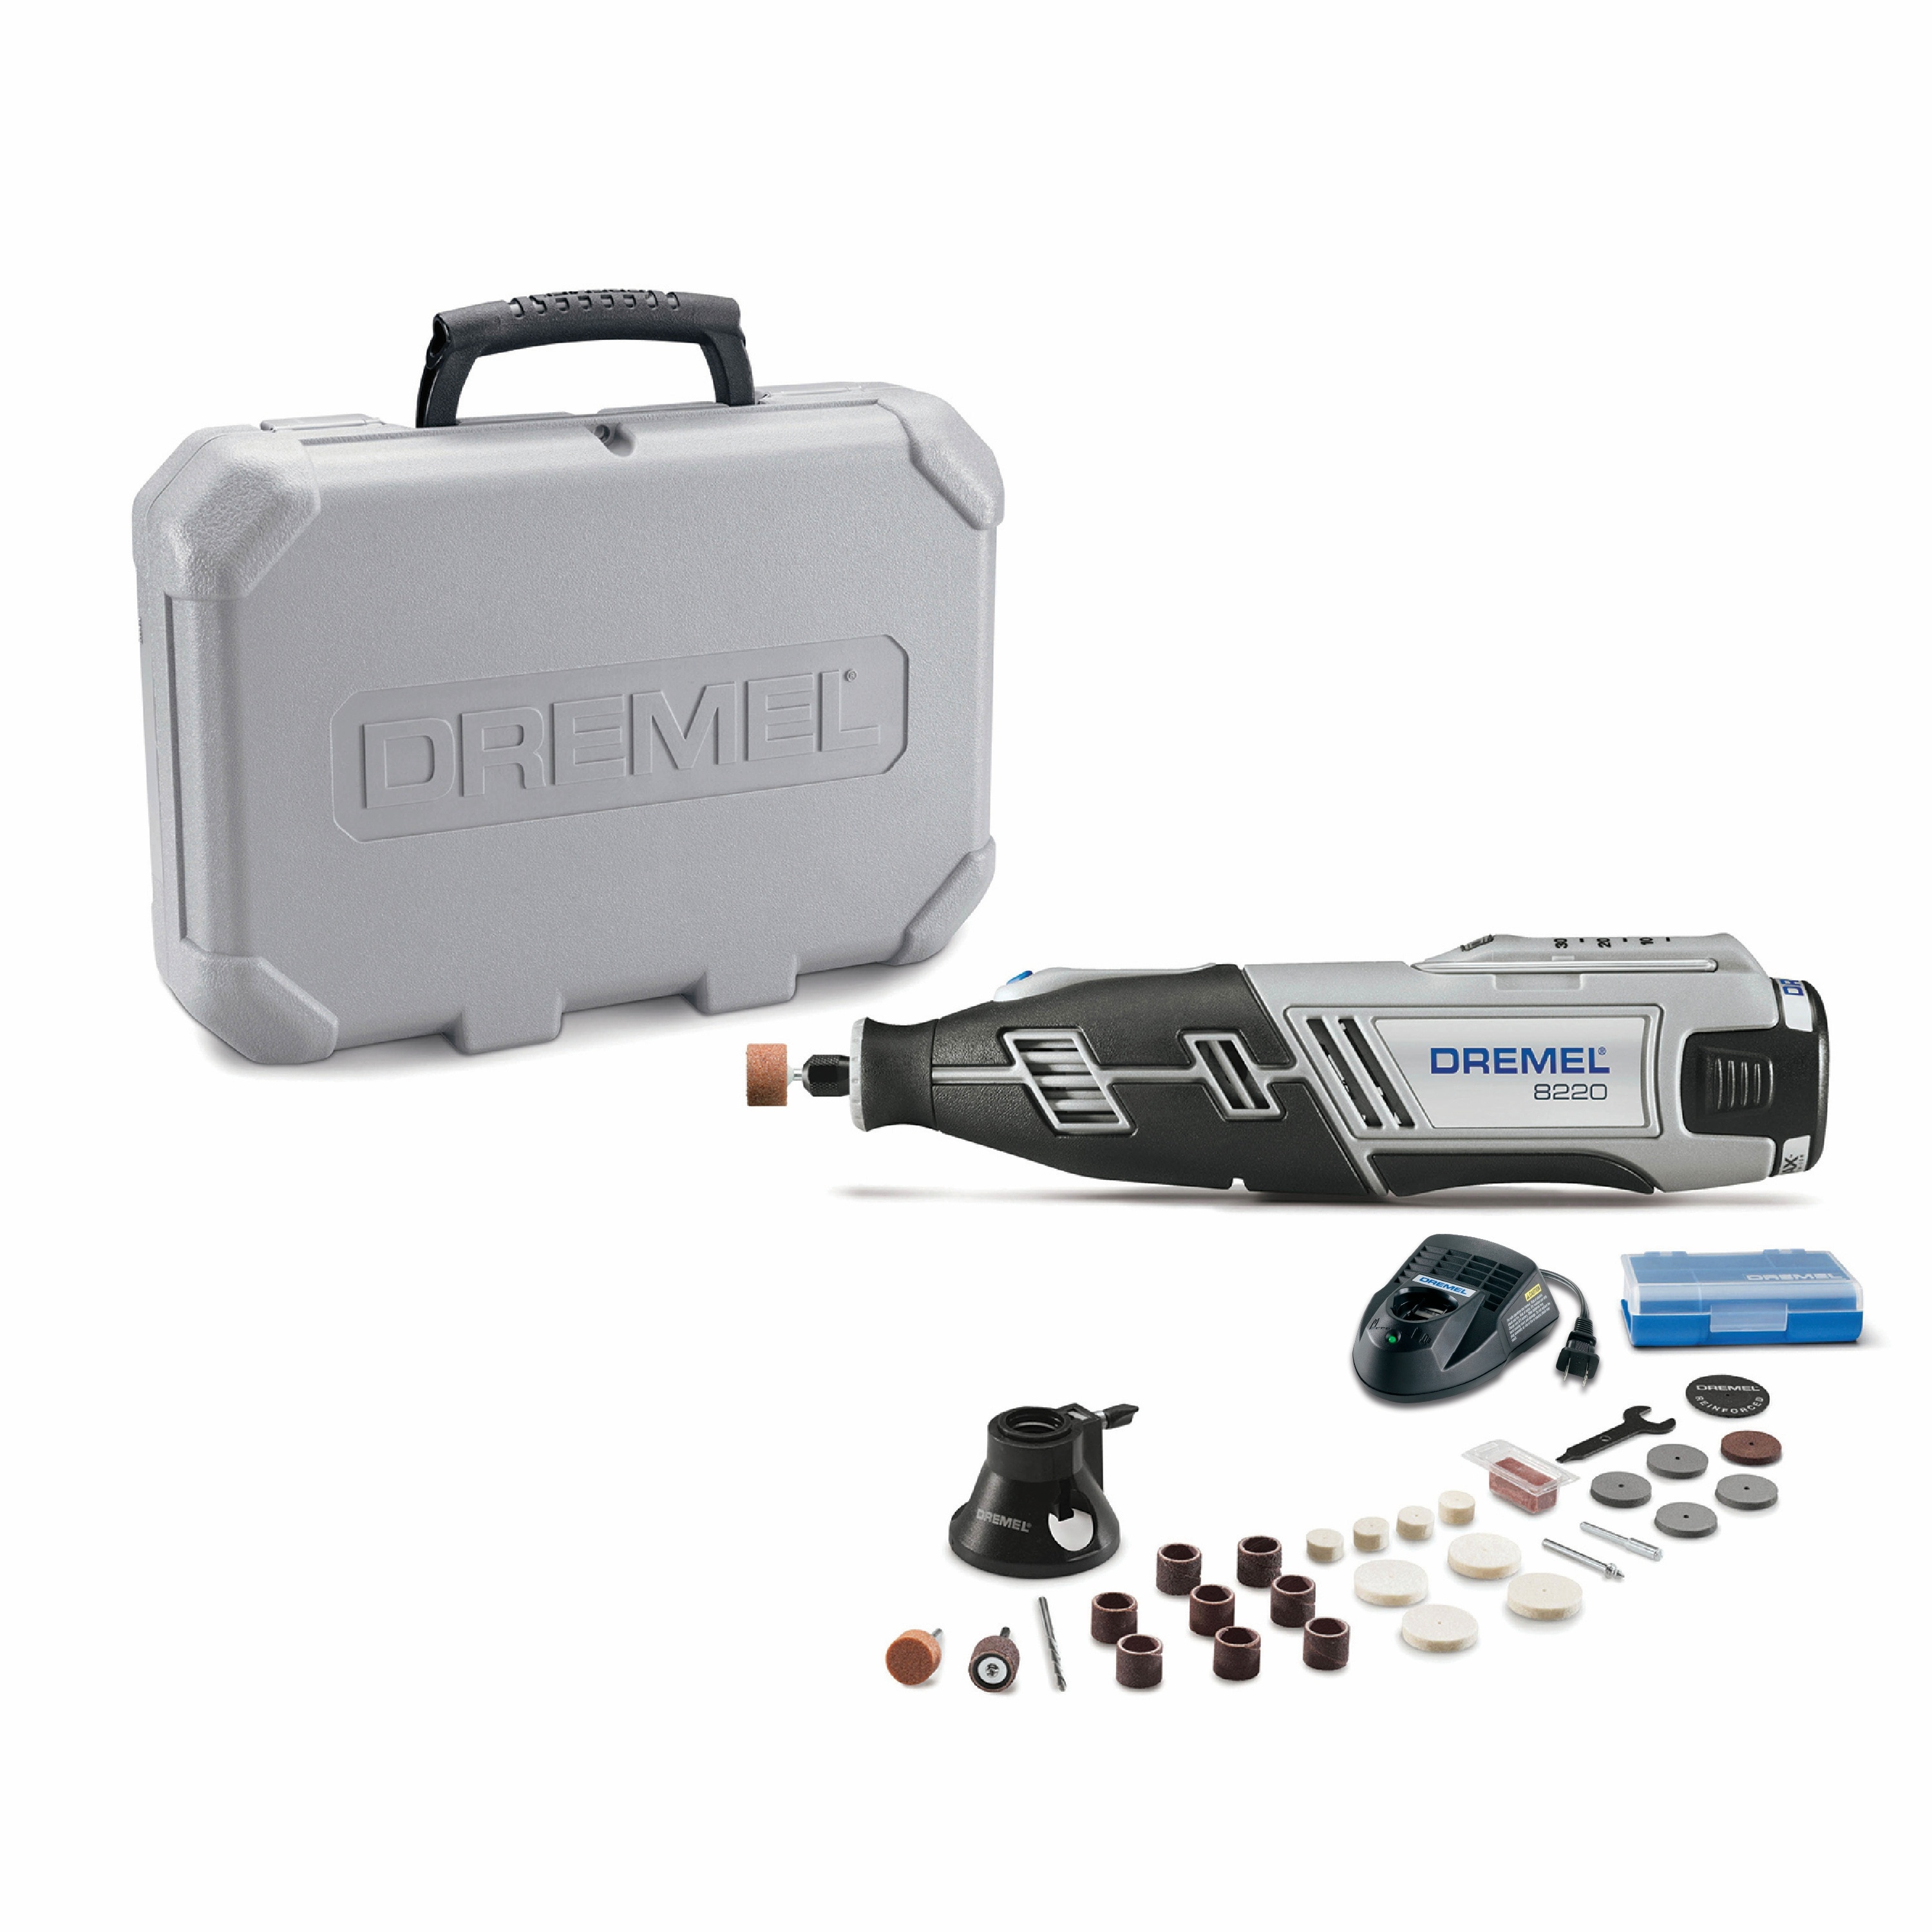 Dremel 8240 12V Cordless Rotary Tool Kit with Variable Speed and Comfort  Grip